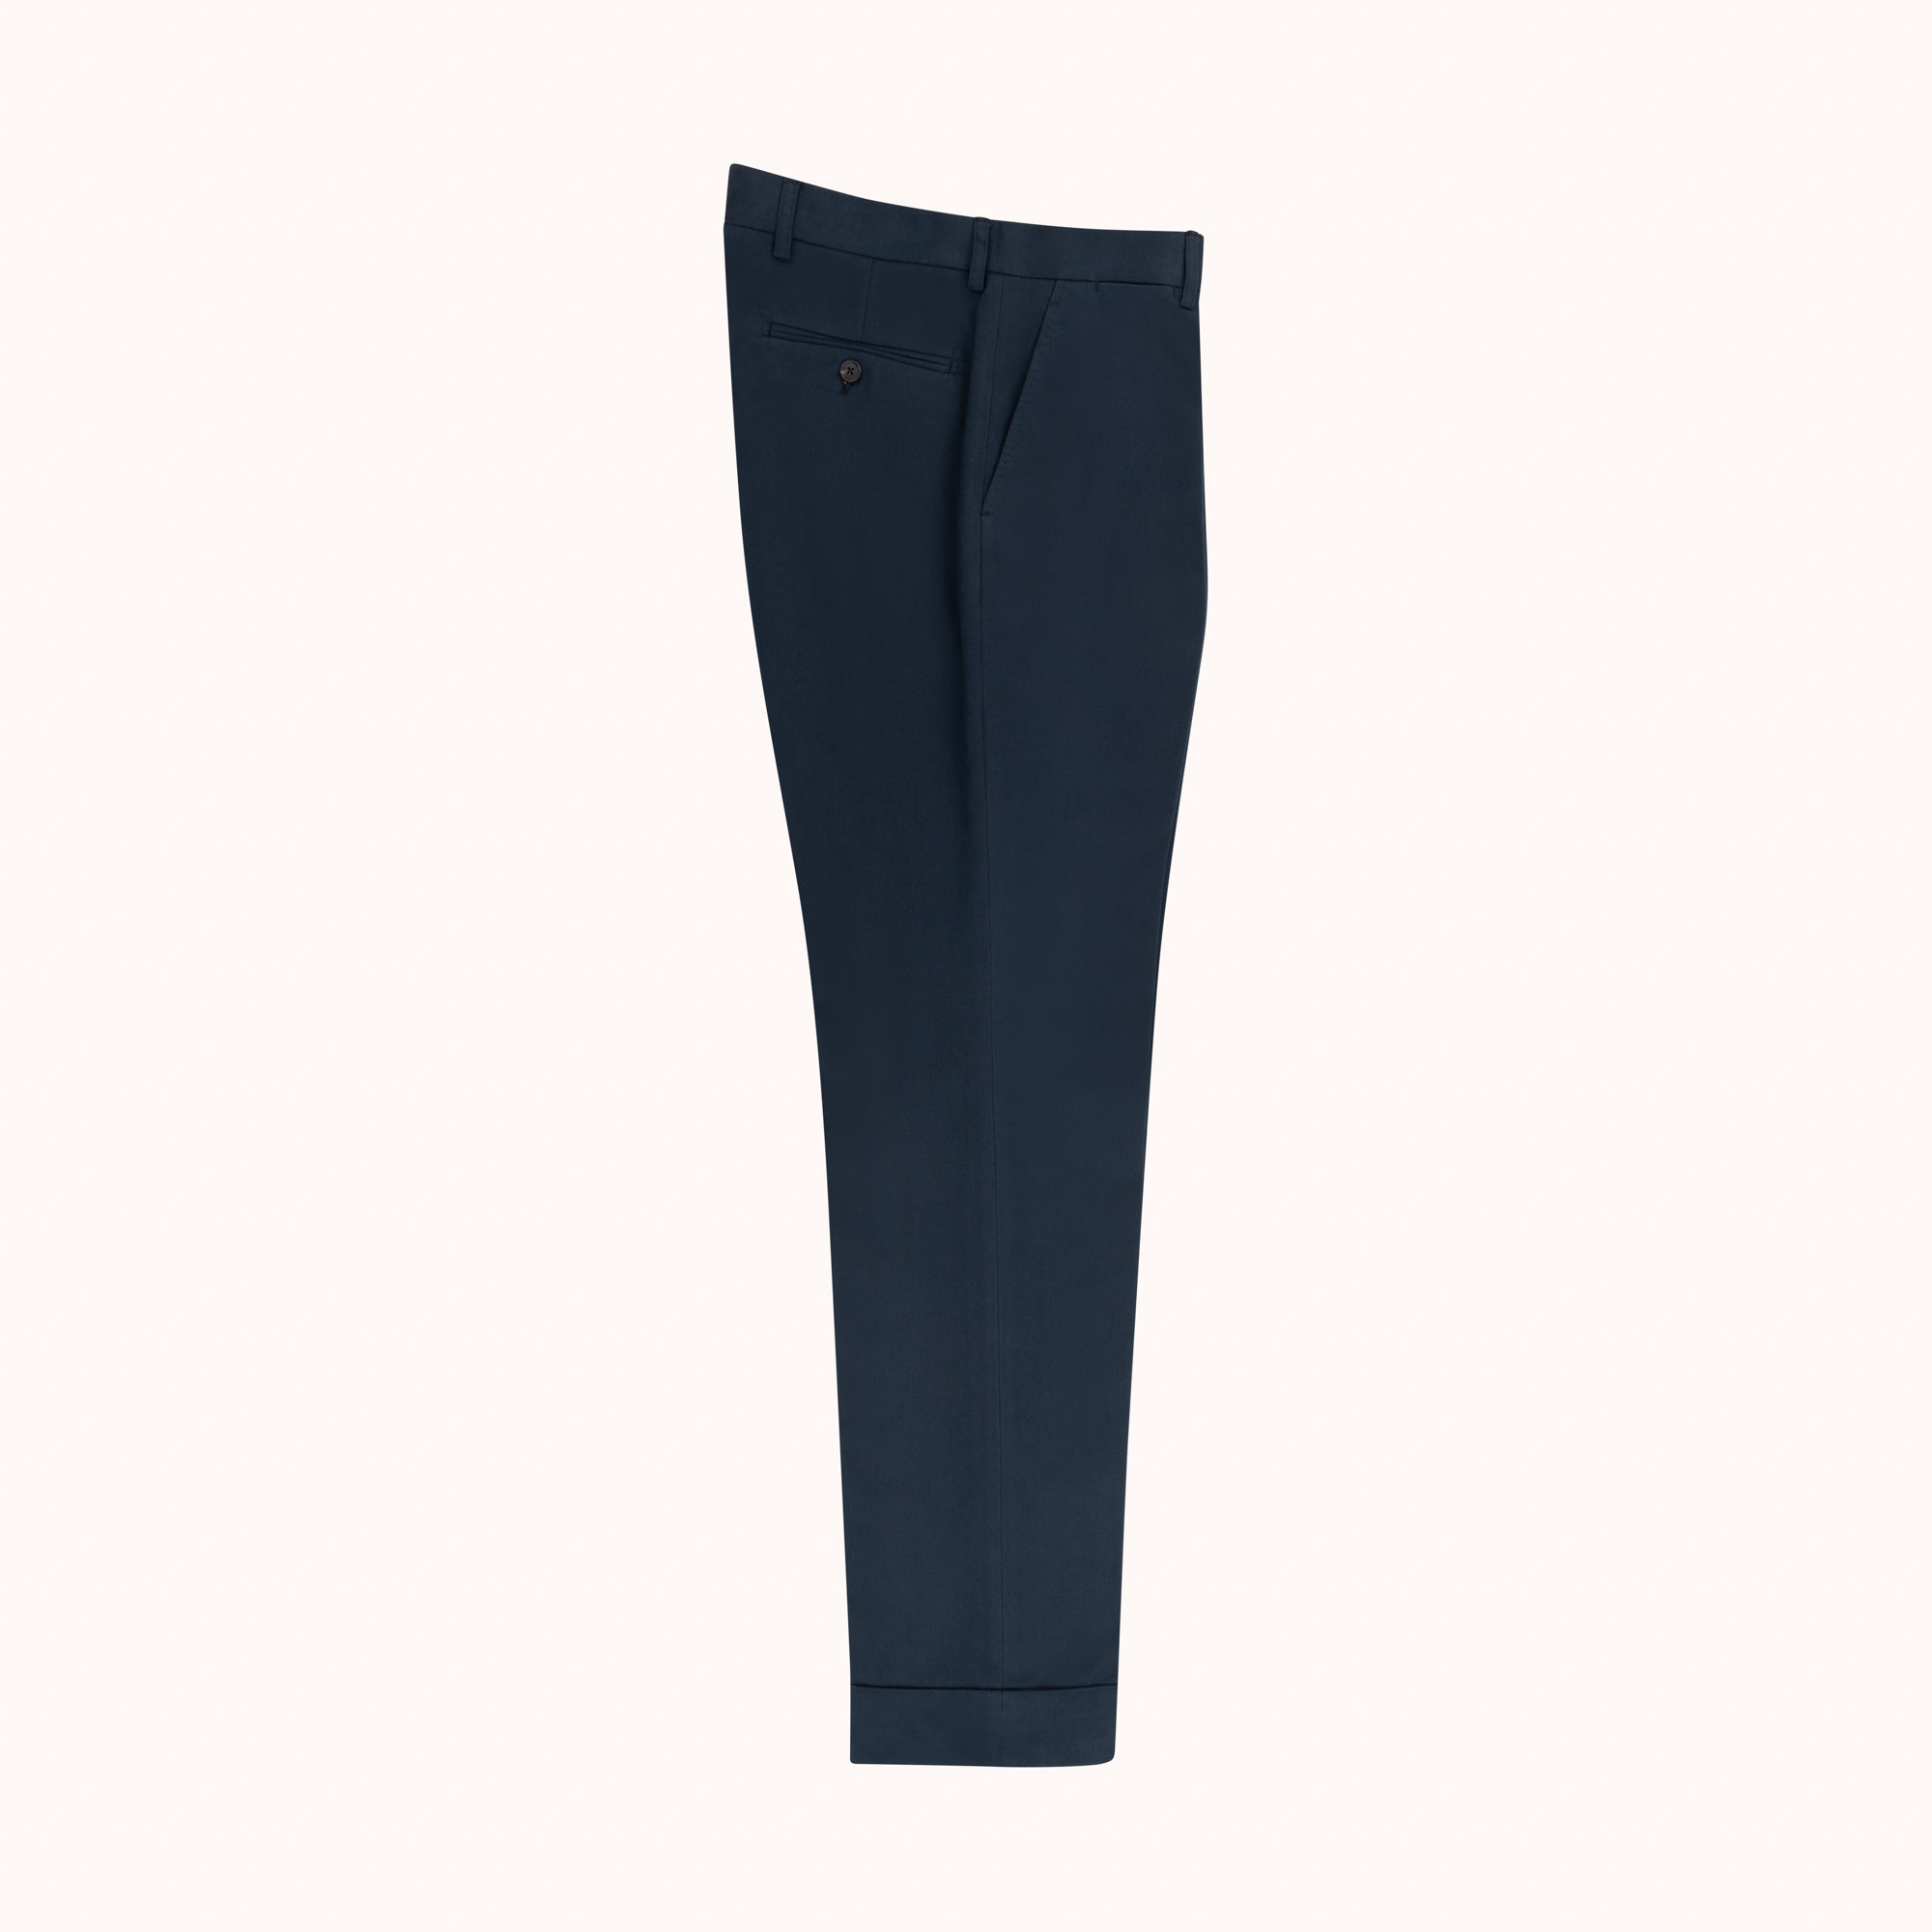 Flat Front Trouser - Navy Brushed Cotton